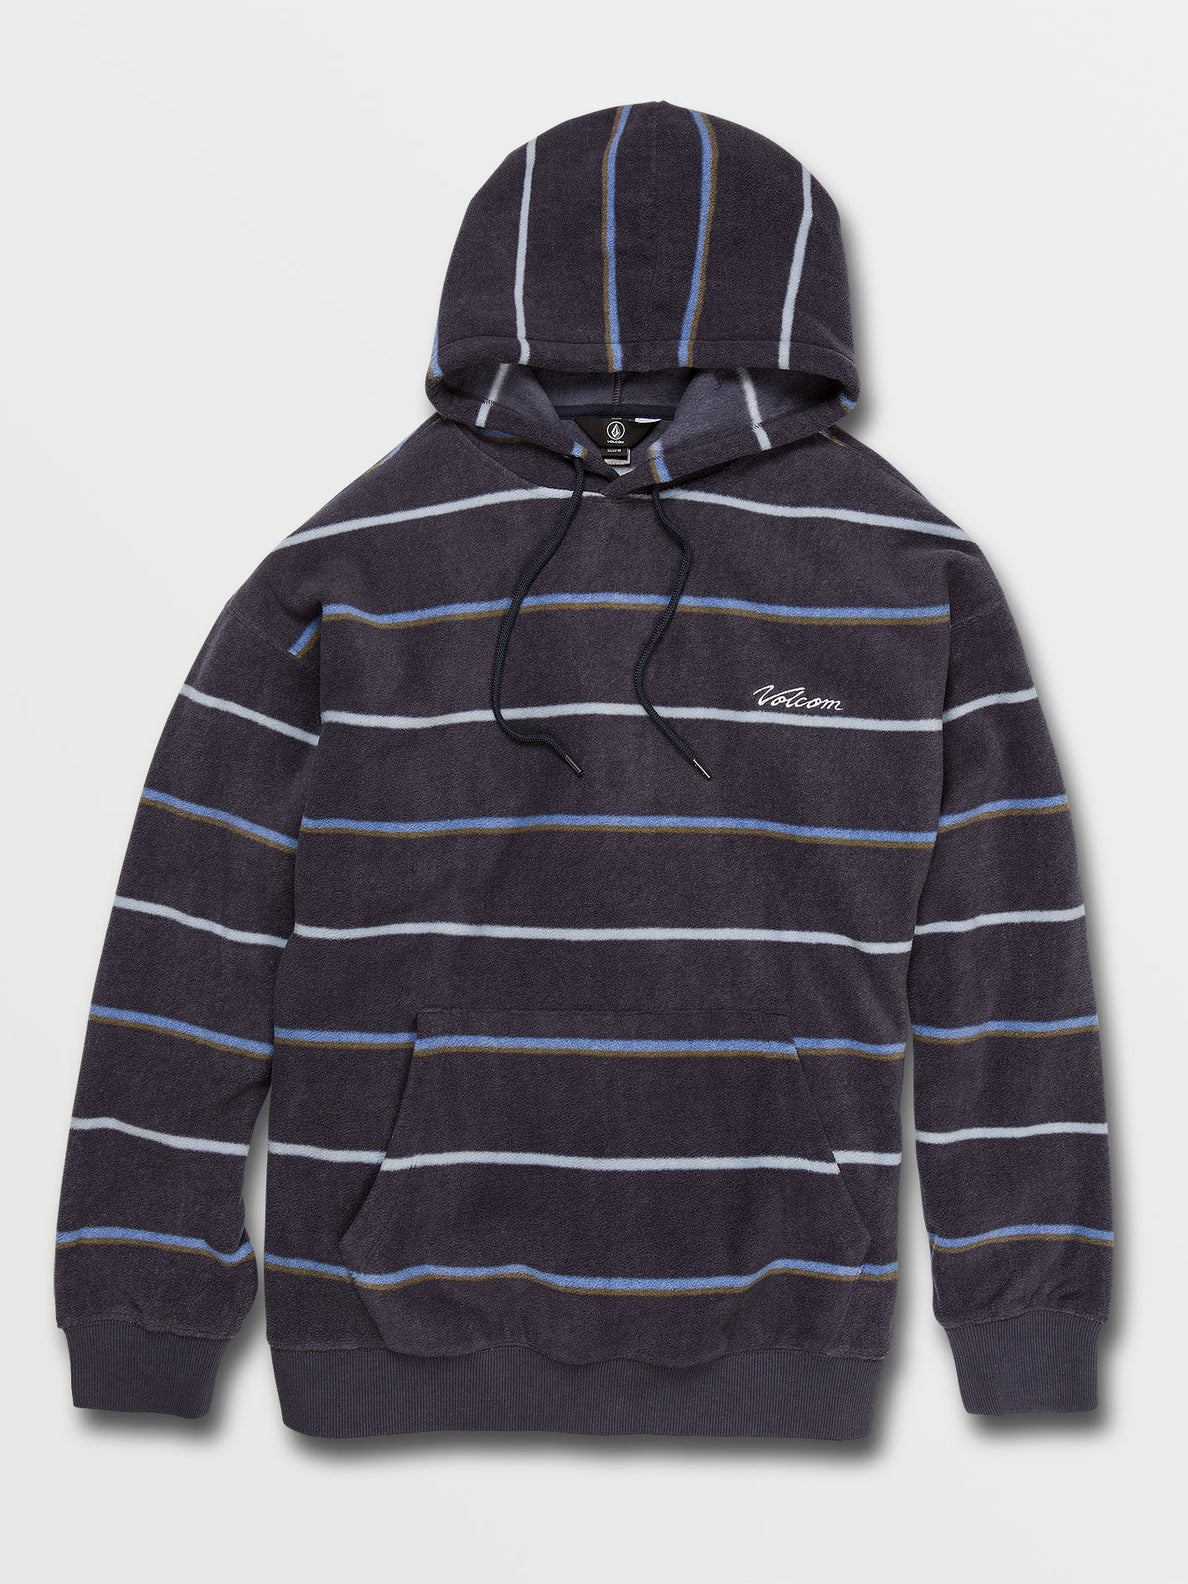 Throw Exceptions Pullover Hoodie - Navy (A4142101_NVY) [F]